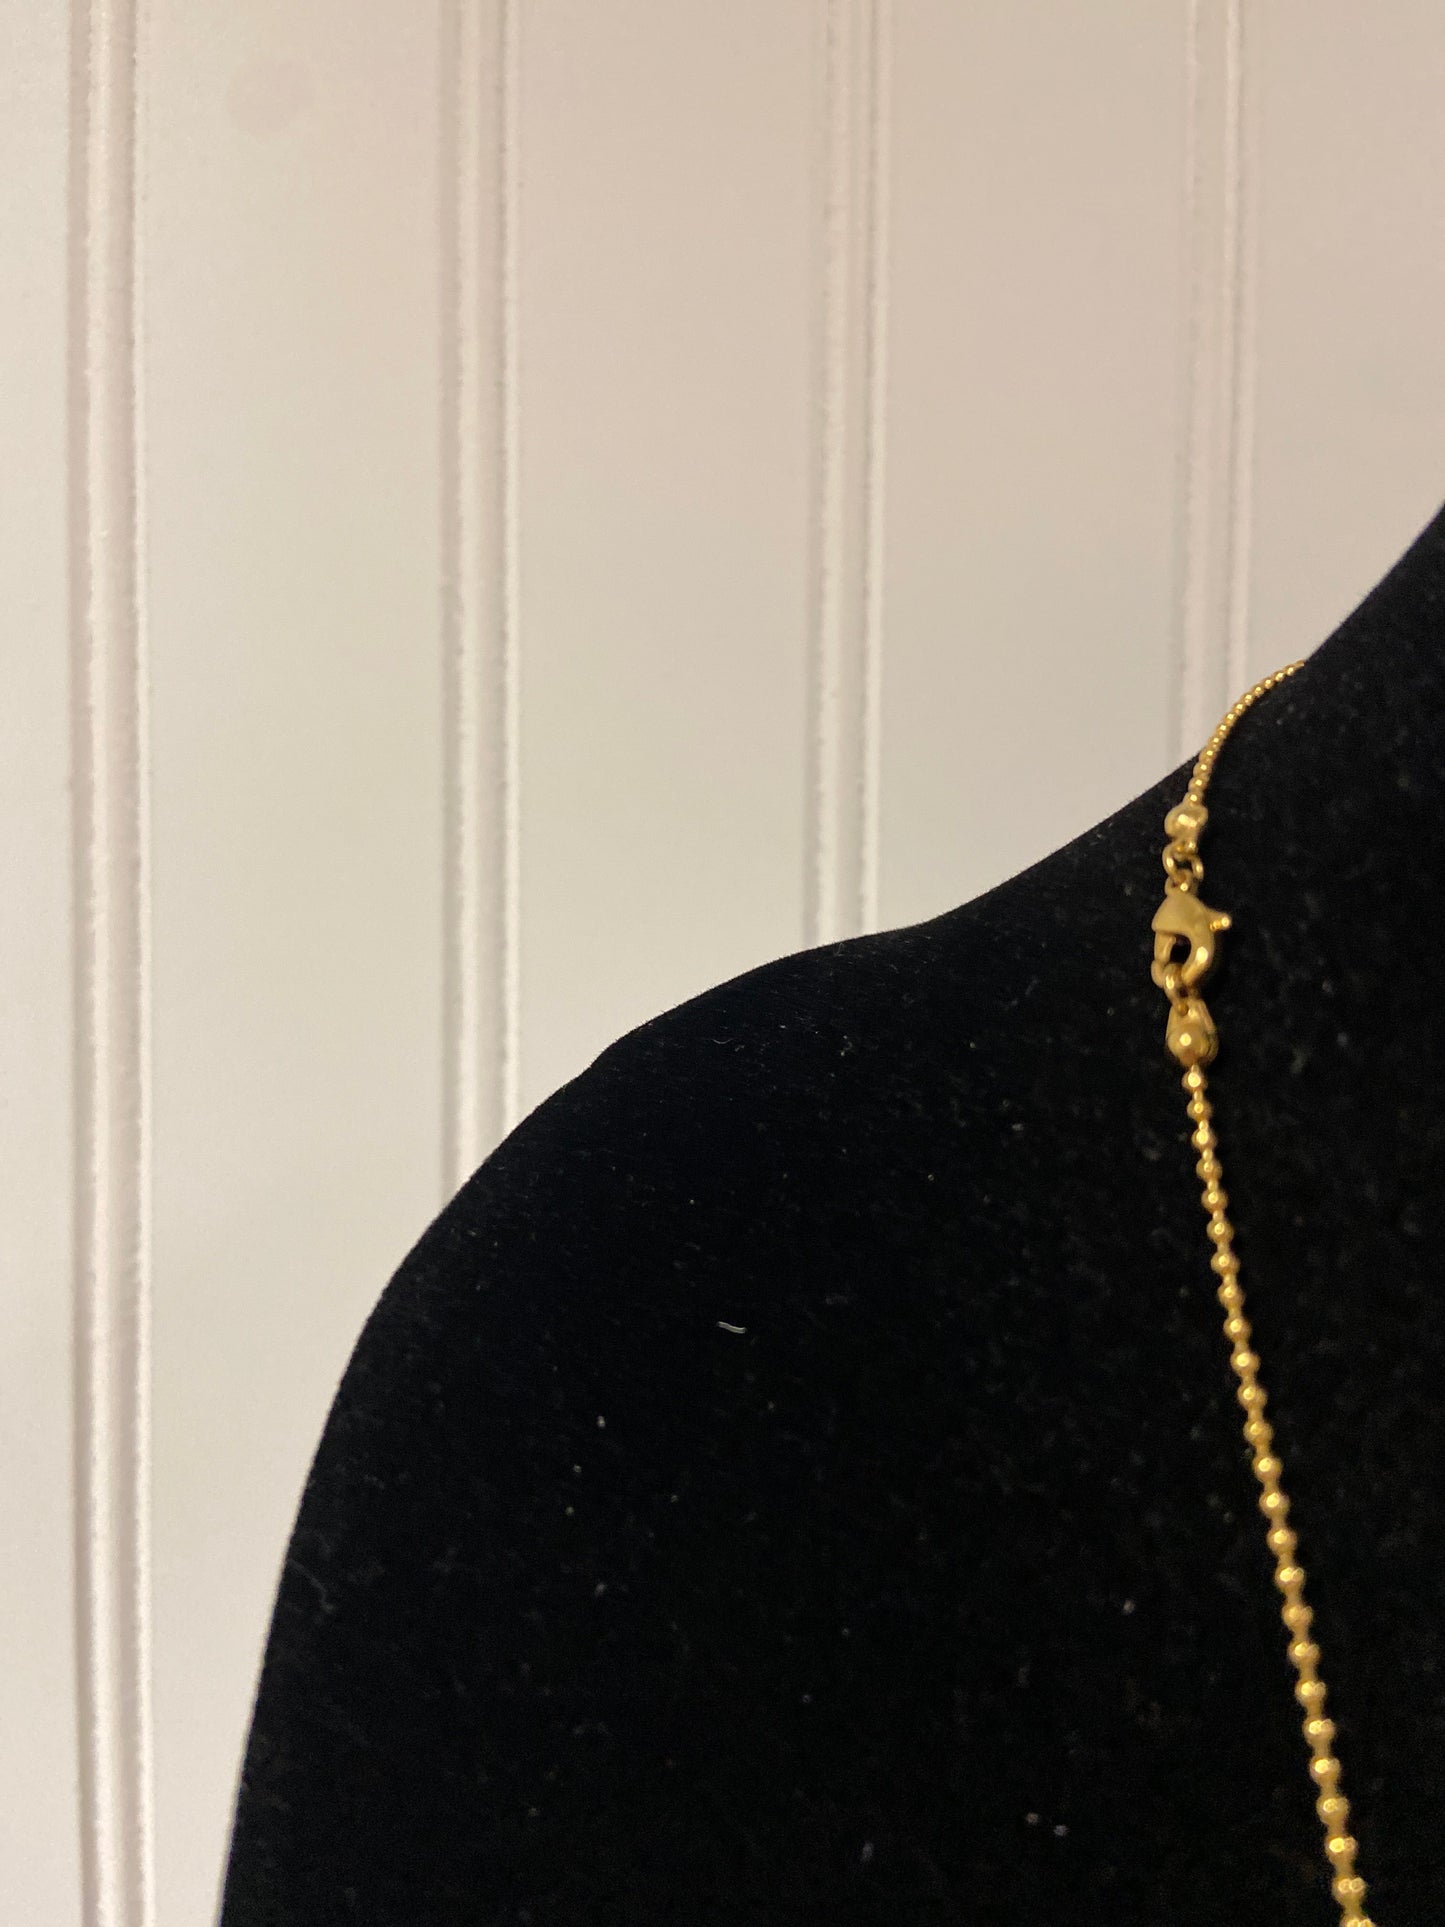 Necklace Statement Clothes Mentor